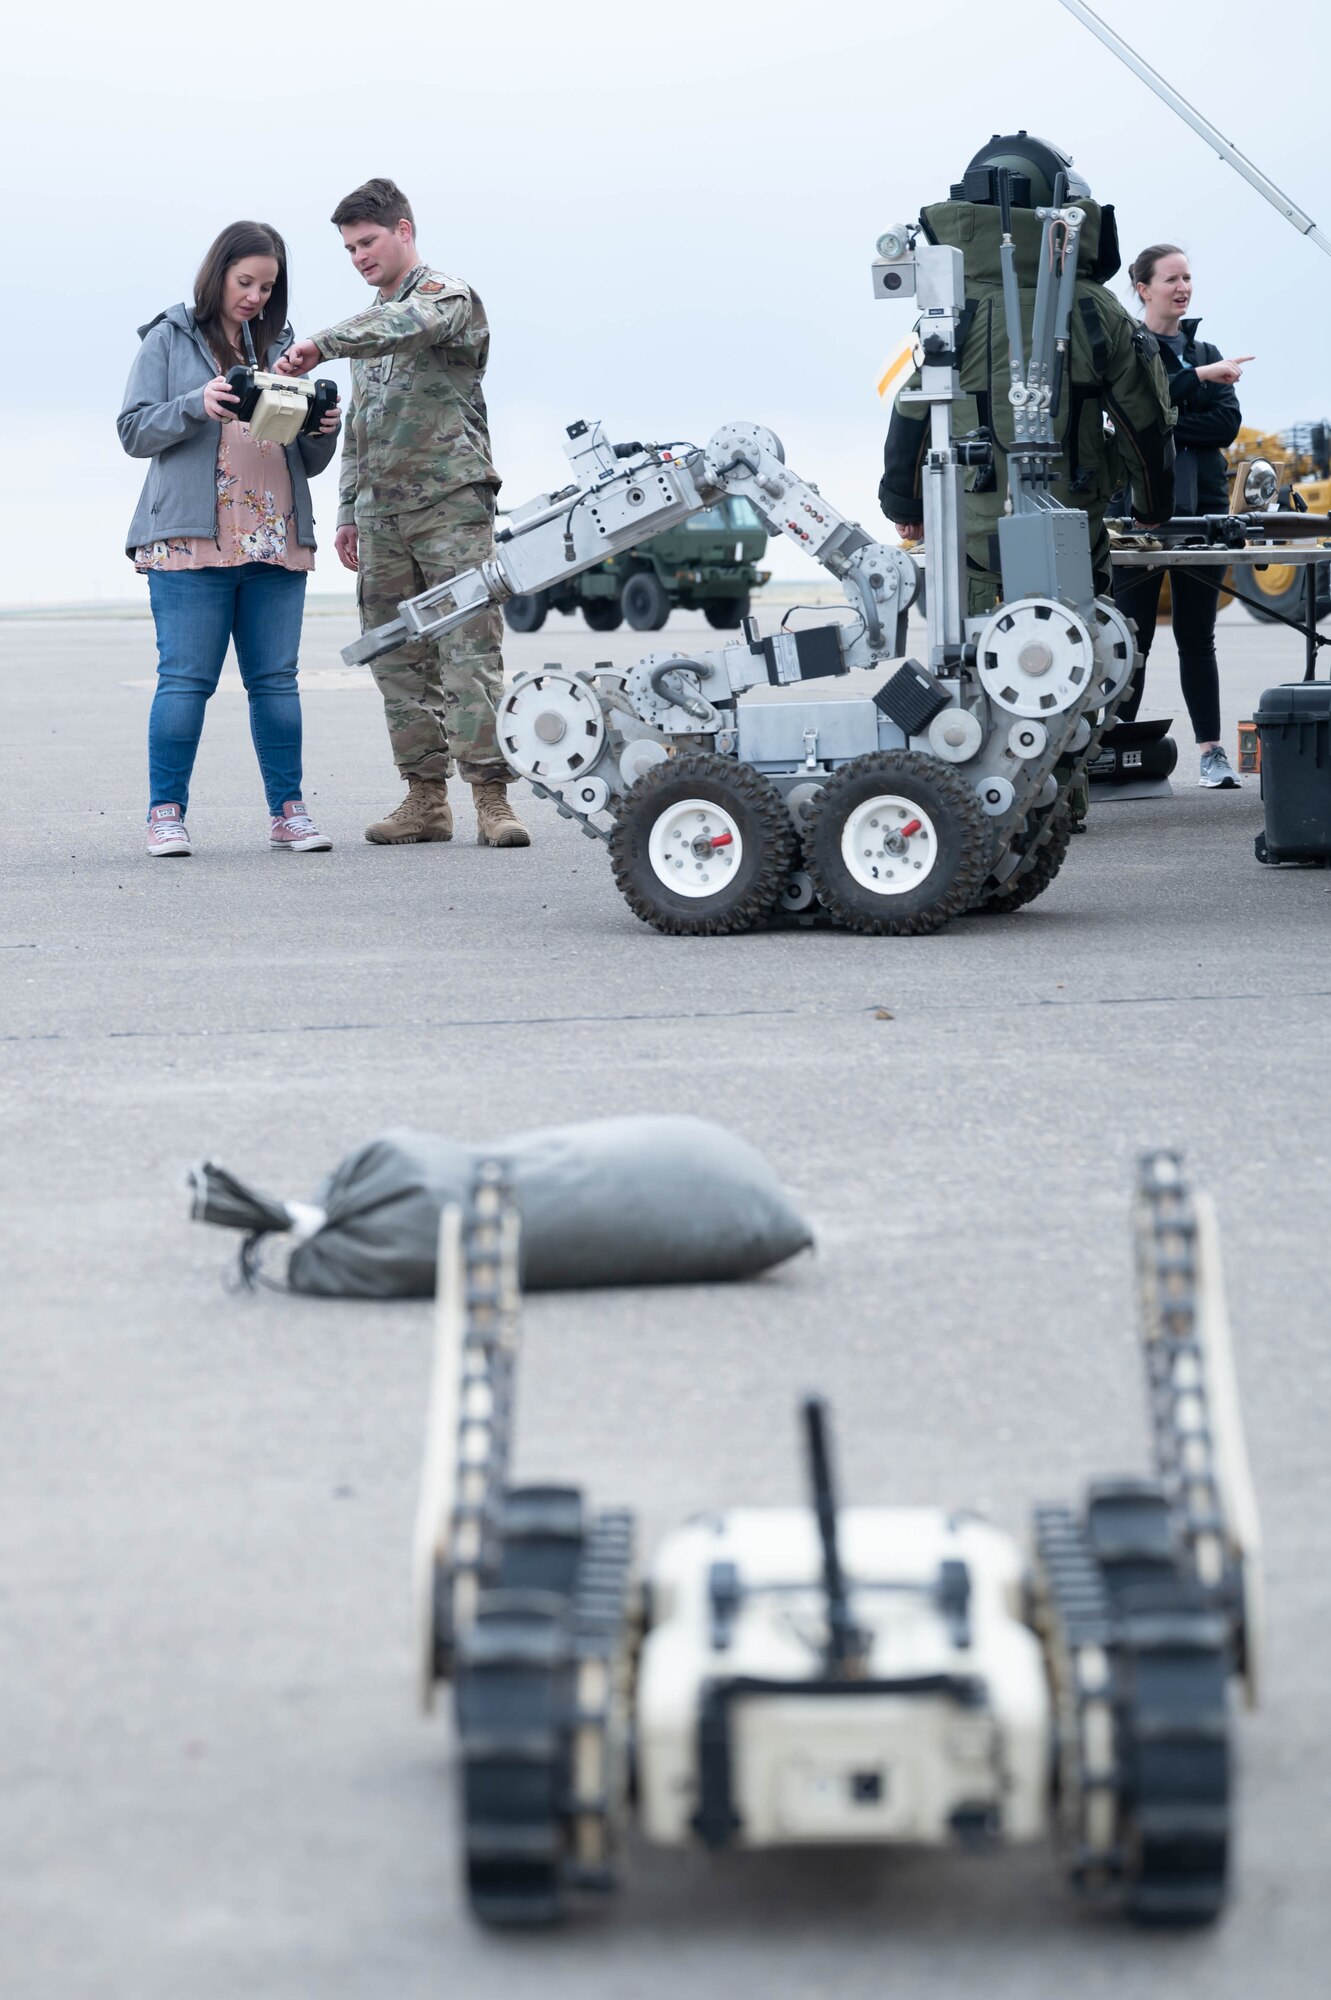 Senior Airman Ryan Gildehaus, right, 341st Civil Engineer Squadron explosive ordinance disposal technician, shows Nicole Nelson, military spouse, how to use an EOD robot during a tour May 7, 2021, at Malmstrom Air Force Base, Mont.